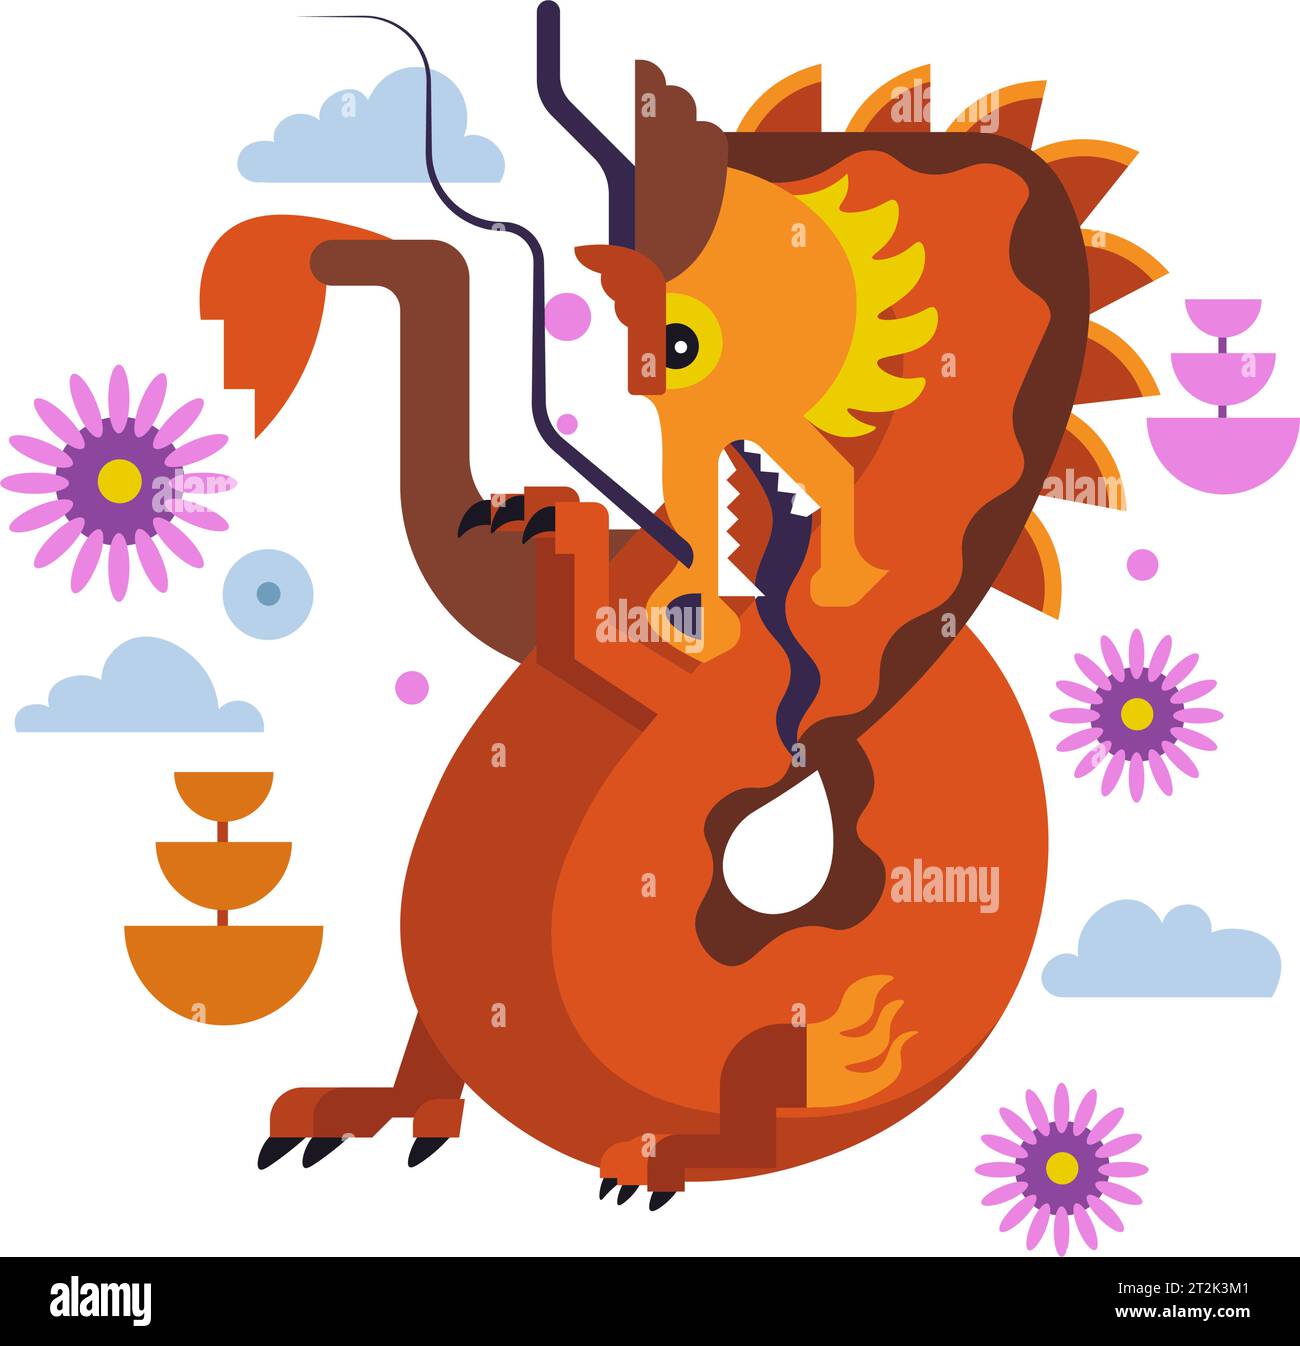 Dragon creature Chinese mythology personage vector Stock Vector